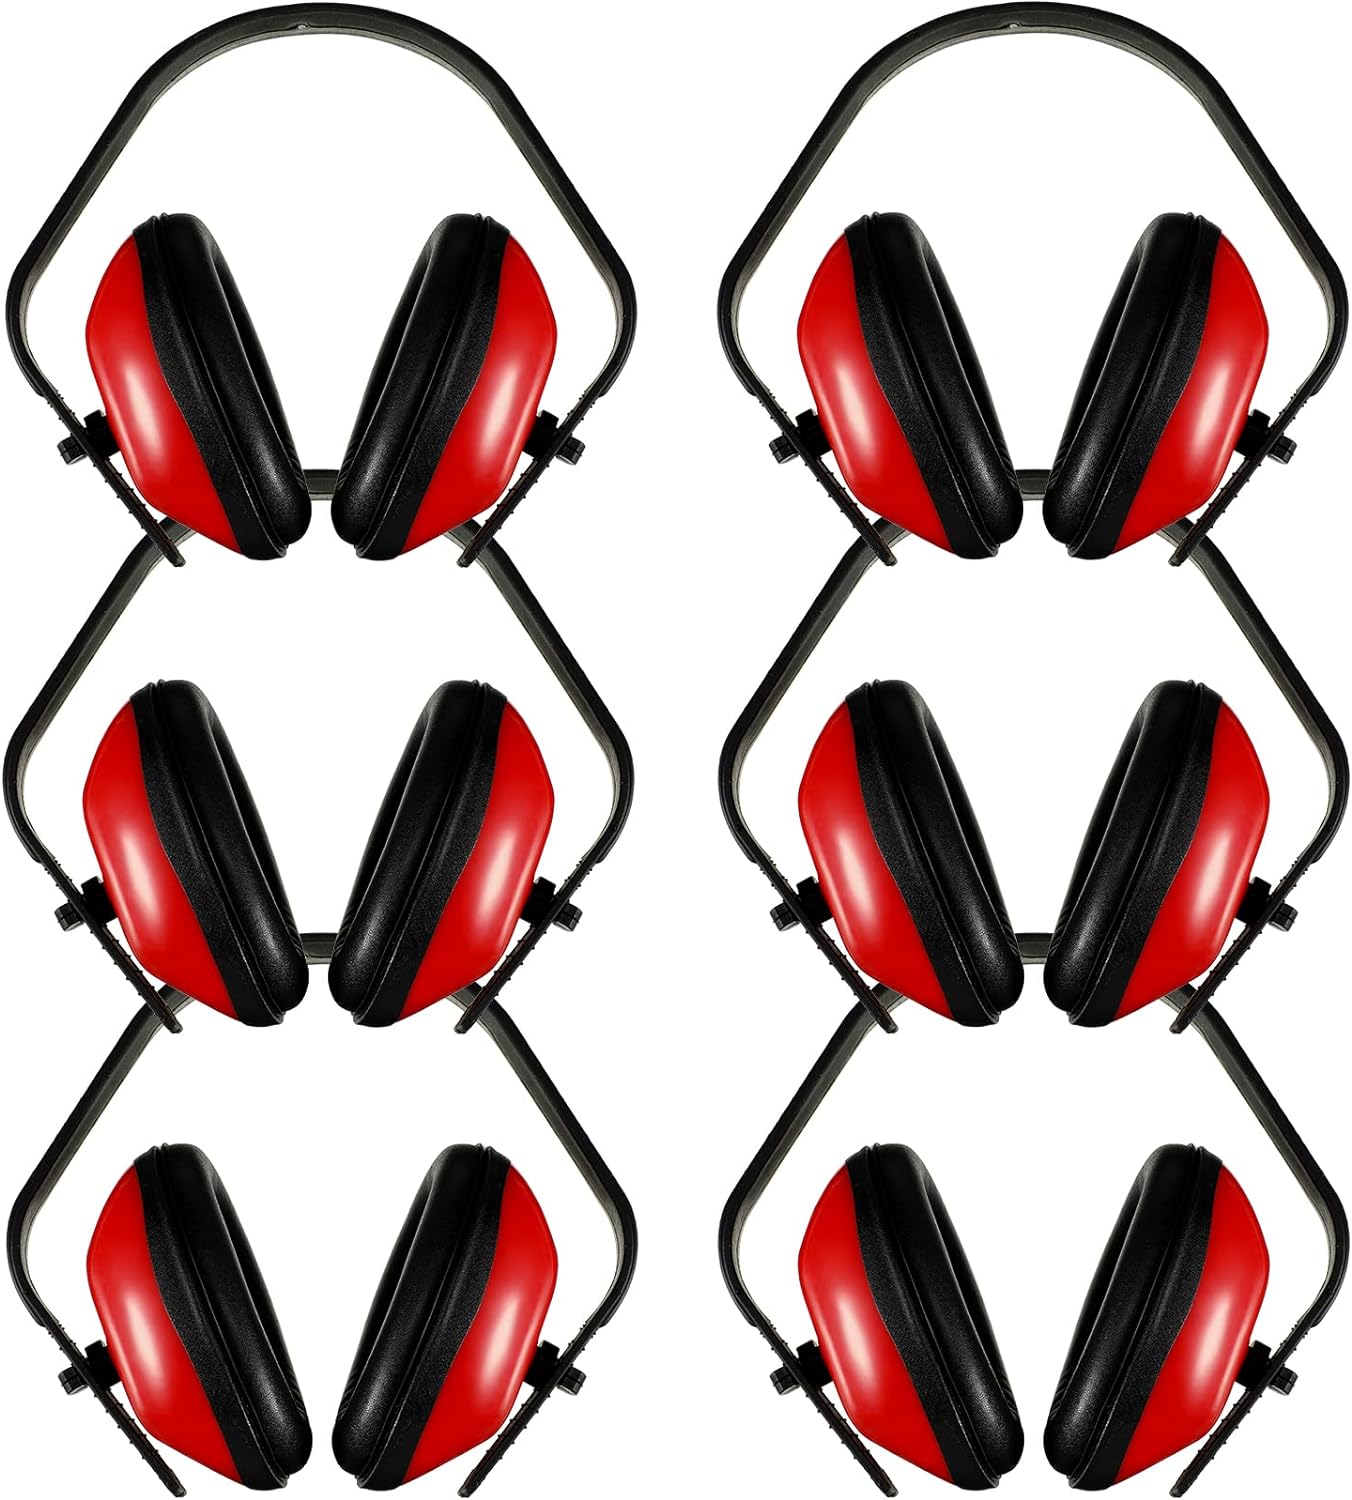 Maitys 6 Pcs Soundproof Earmuffs Hearing Protection Headphones Adjustable Padded Defender Noise Reduction Earplug for Kids (Red)